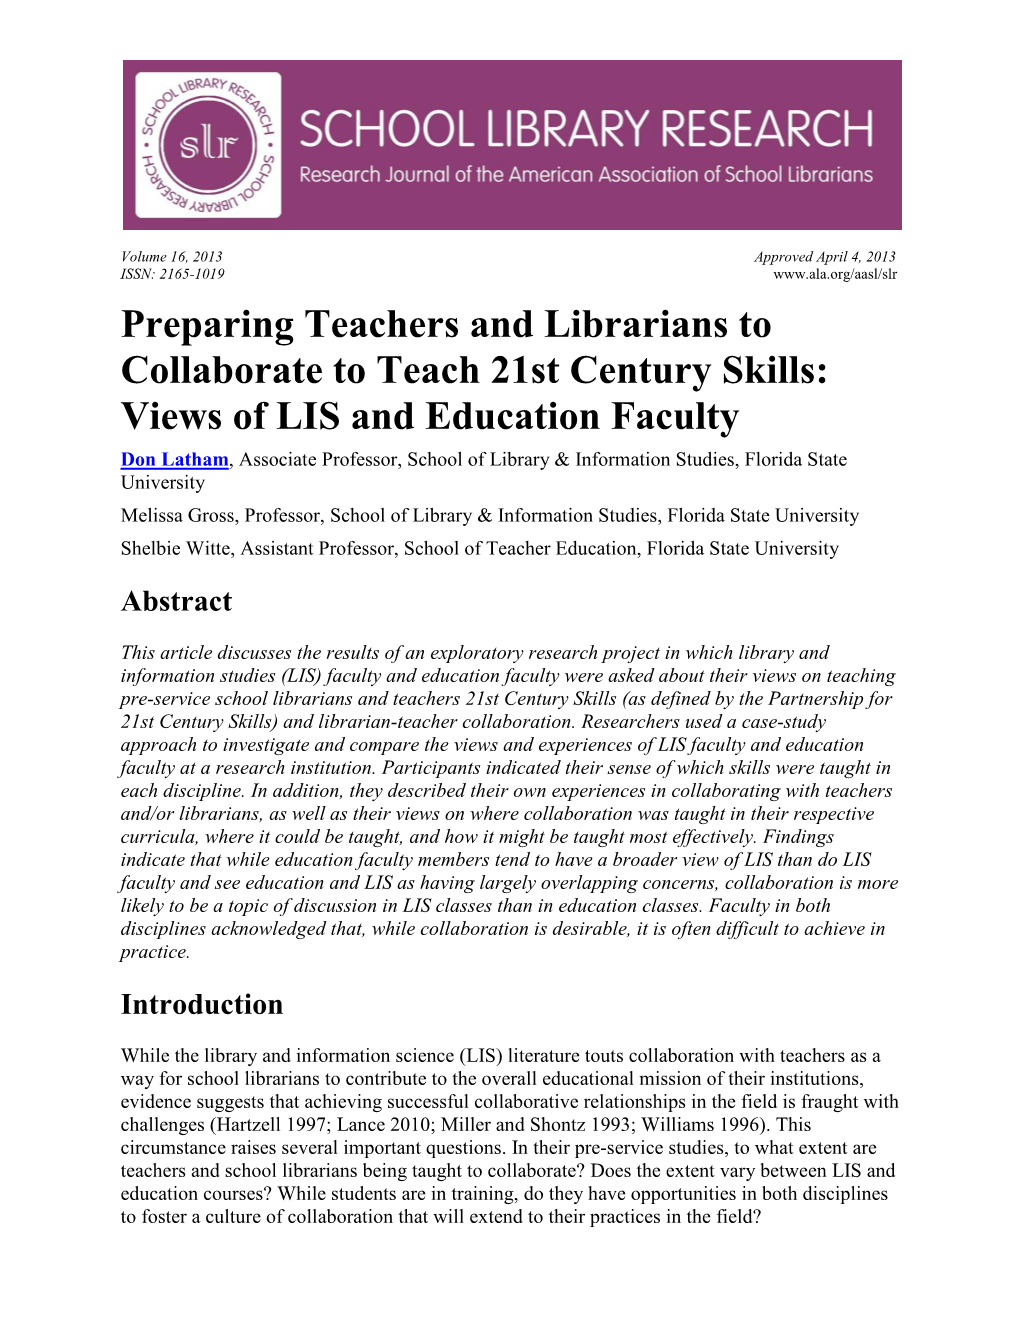 Preparing Teachers and Librarians To